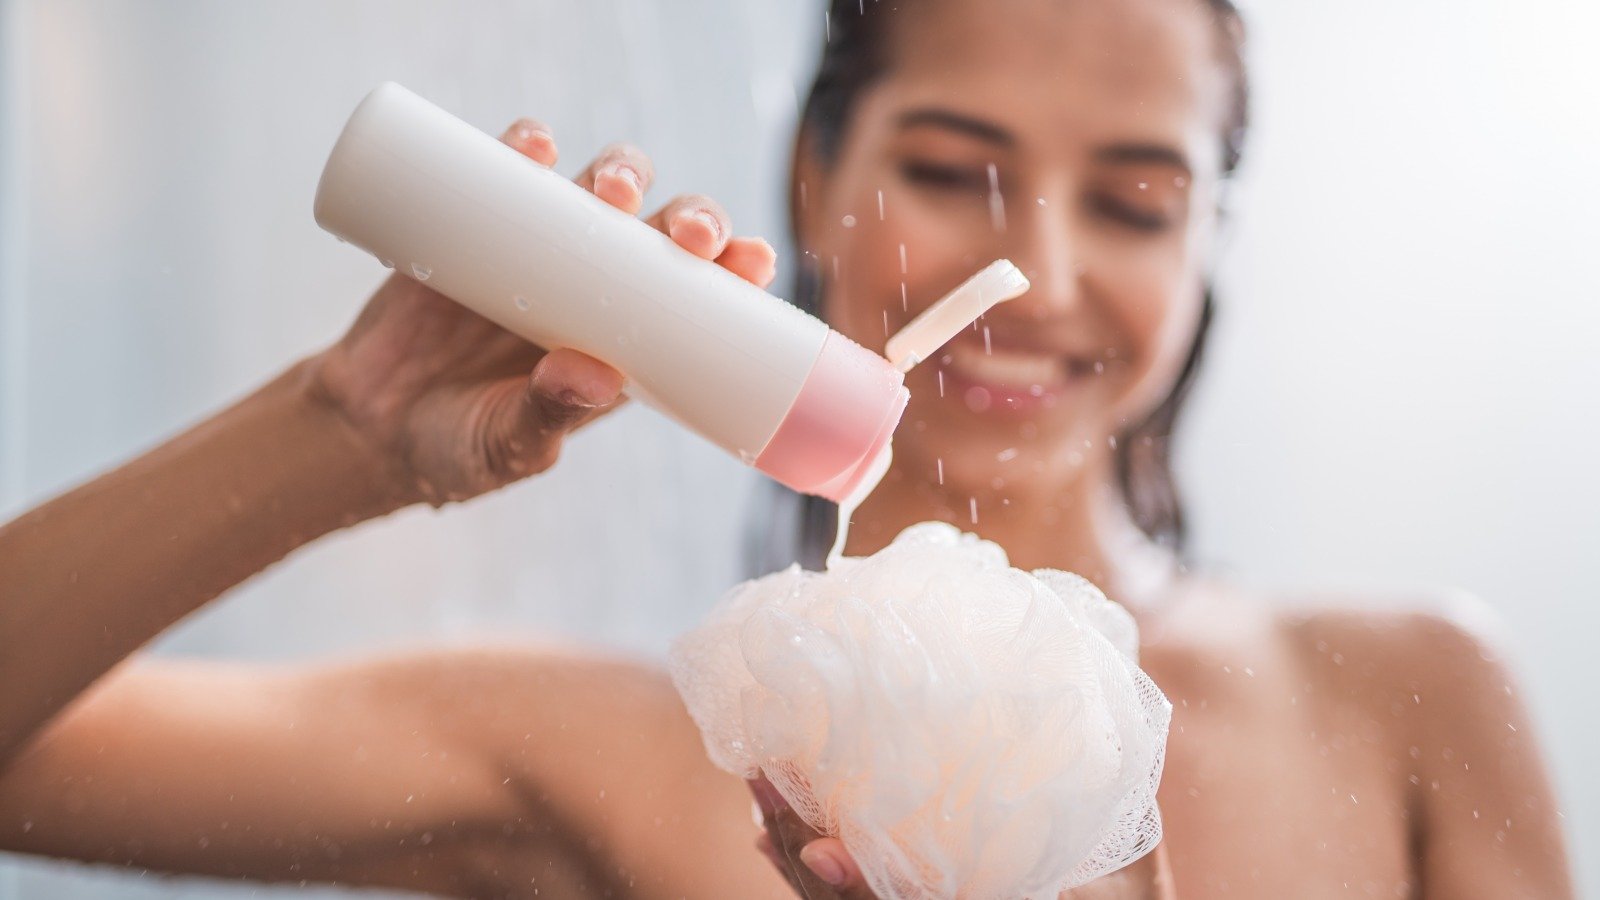 The Only 3 Body Parts You Need To Wash Every Day, According To Science - Health Digest